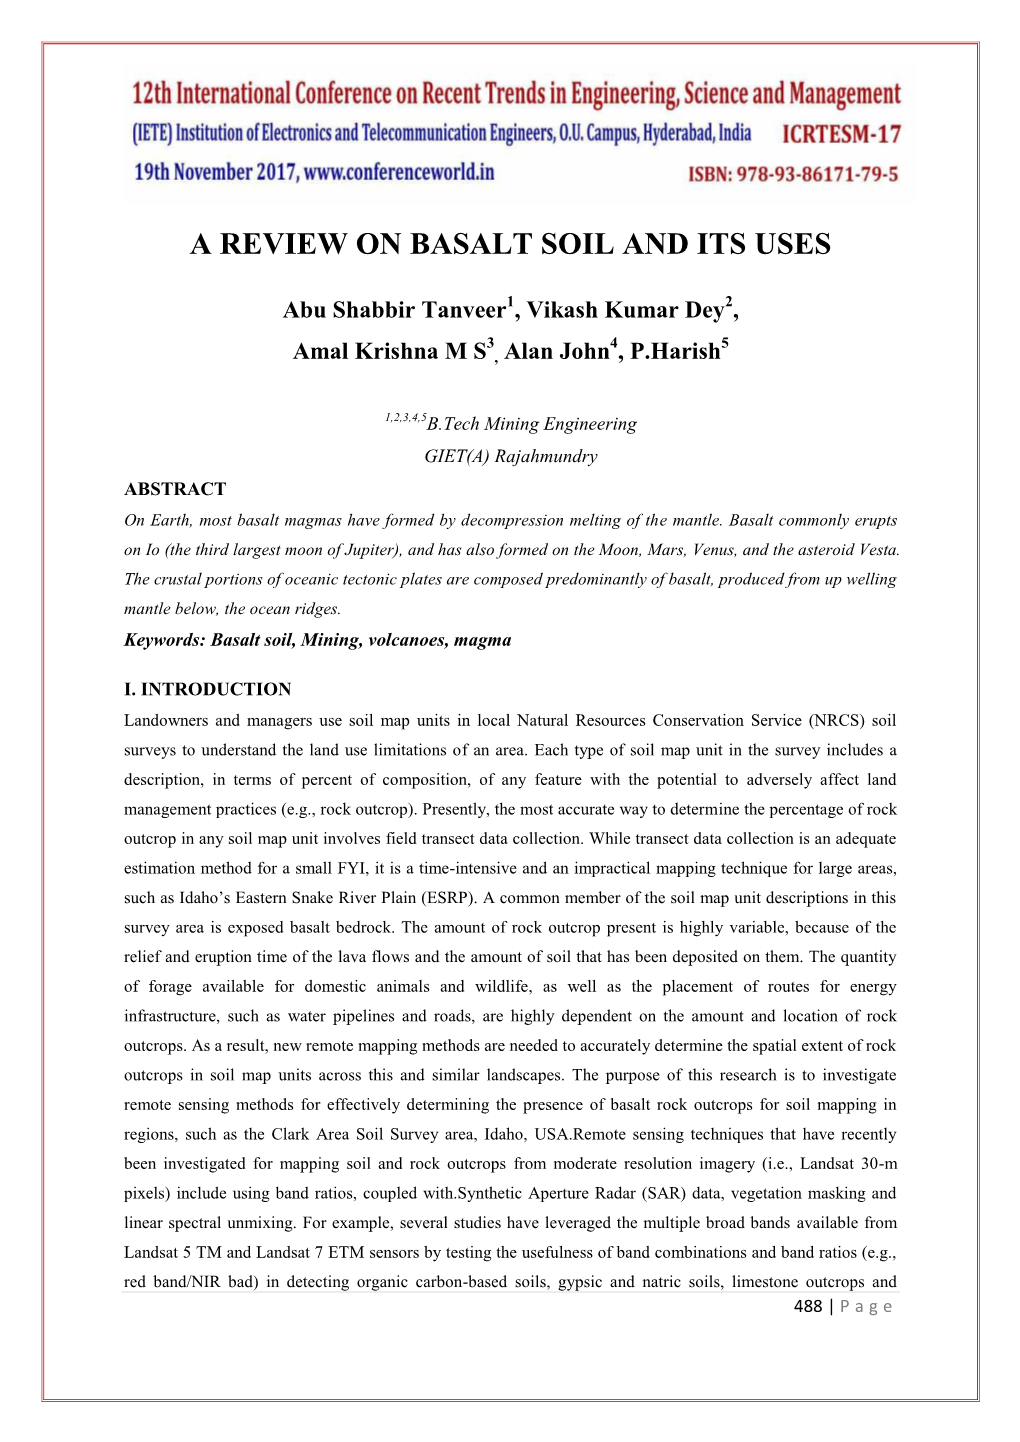 A Review on Basalt Soil and Its Uses